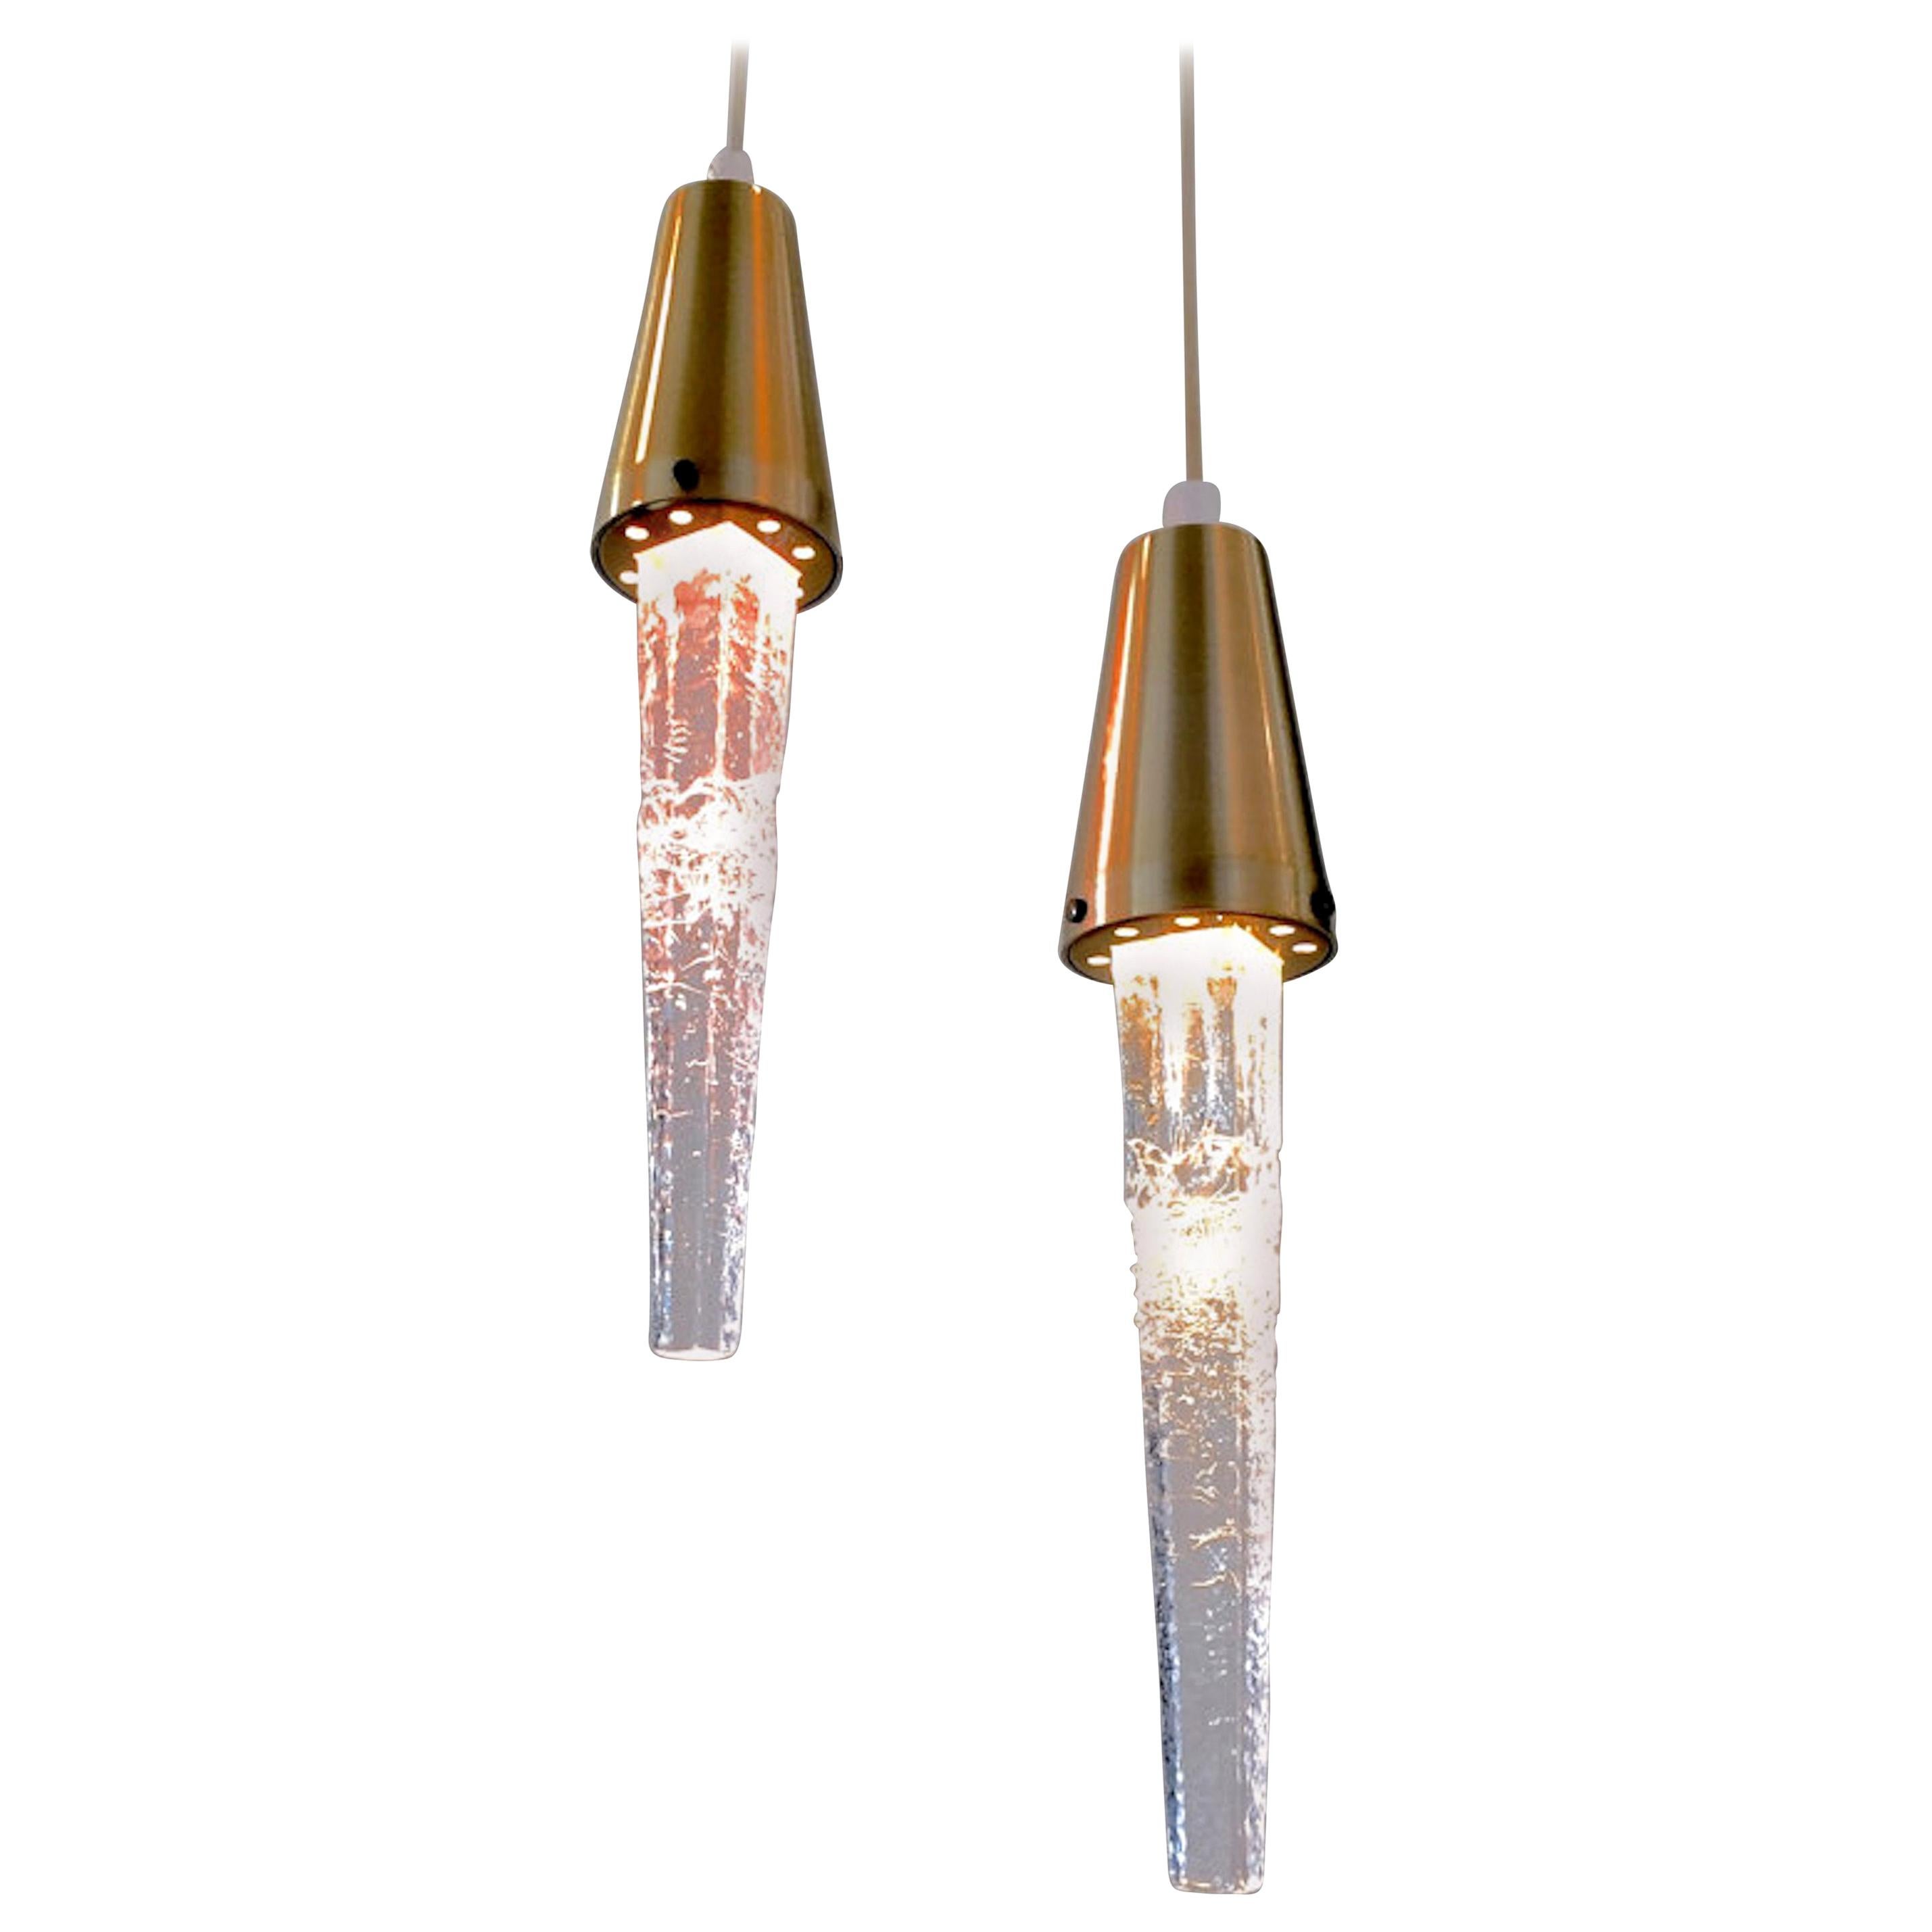 Vintage Scandinavian Crystal Icicle Pendant Lamps from Ateljé Engberg